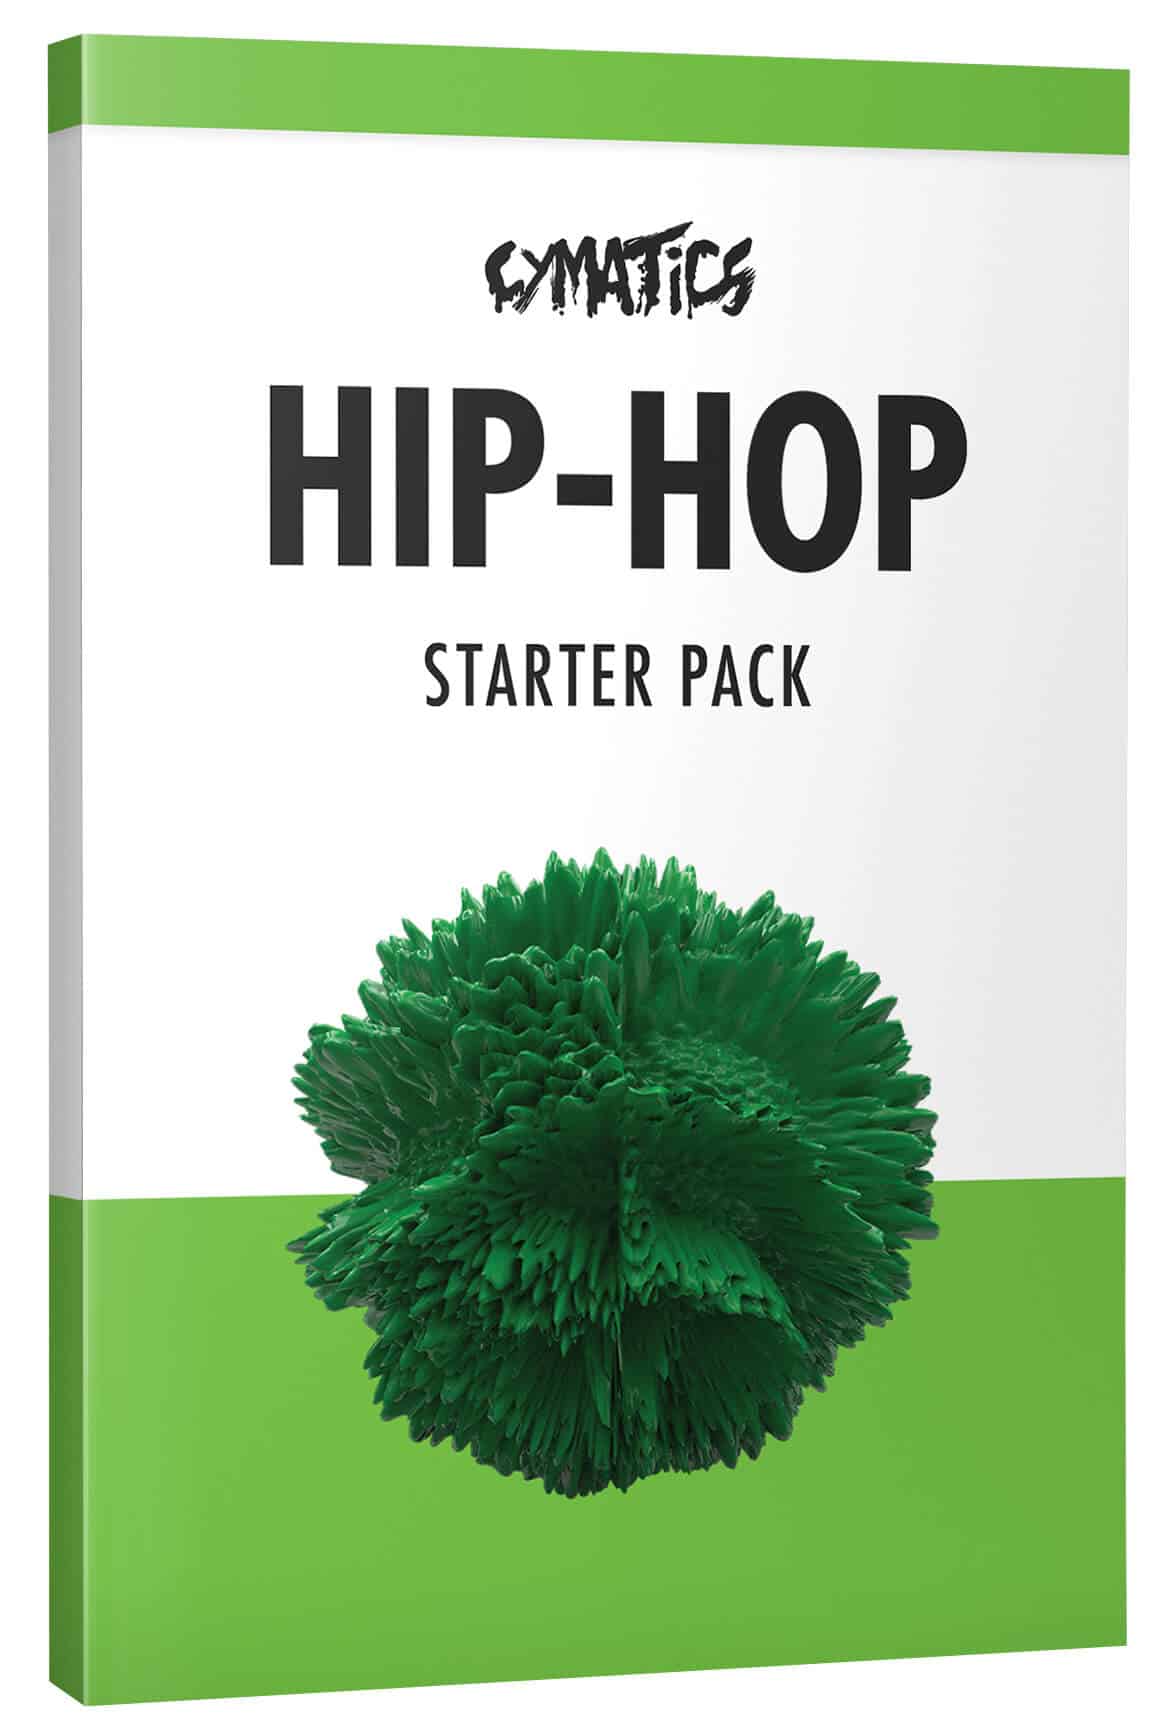 Hip-hop enthusiasts, rejoice! This remarkable starter pack is tailor-made for all those who appreciate the pulsating beats and electrifying rhymes of the genre. Dive into the world of hip-hop with this